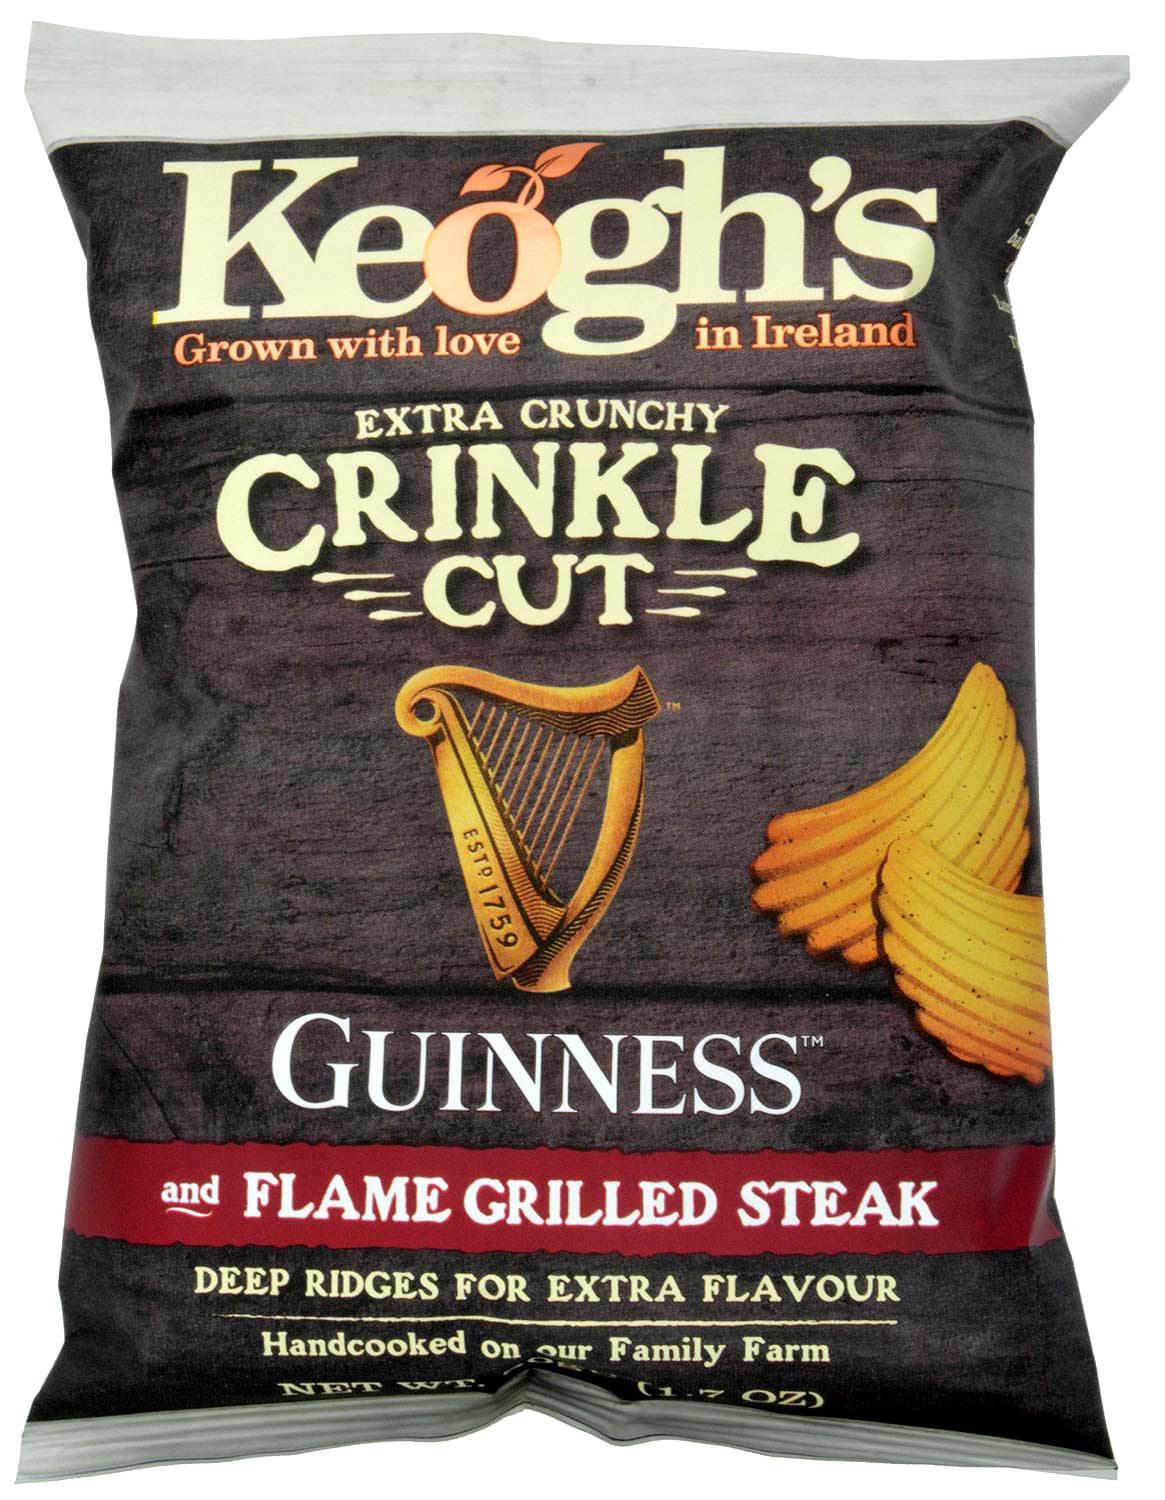 Picture of Keoghs Crinkle Cut Guinness and Flame Grilled Steak 50g